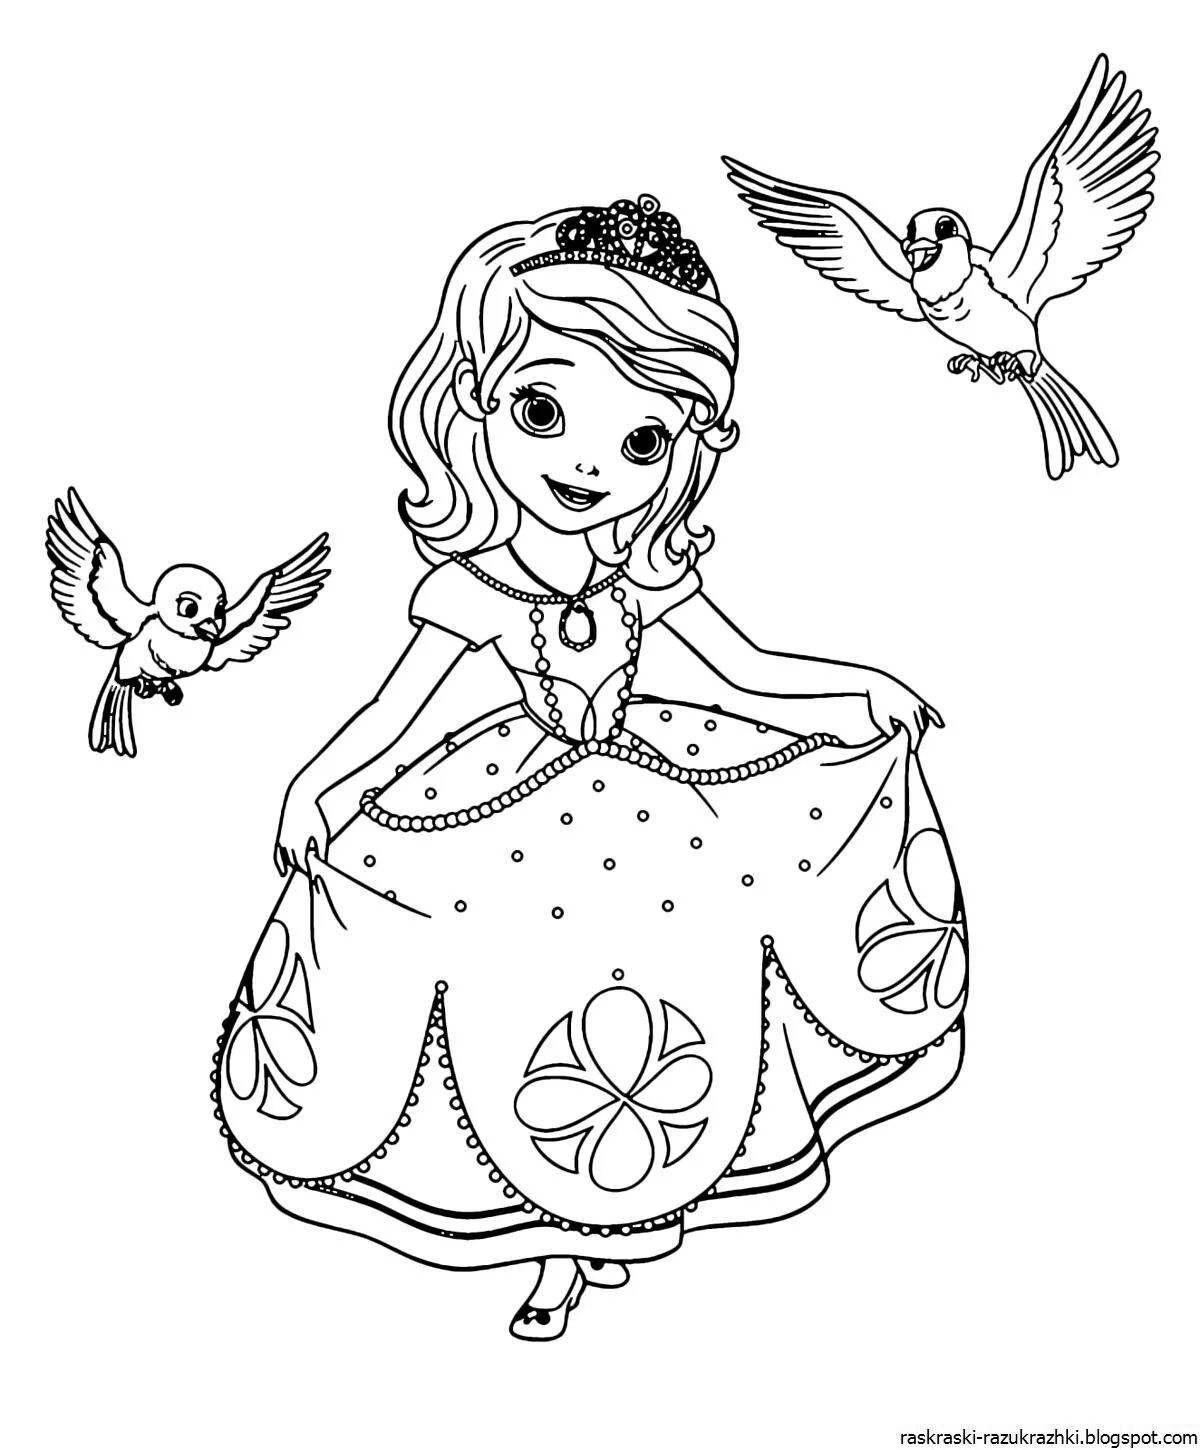 Fun coloring pages of princesses for girls 4-5 years old